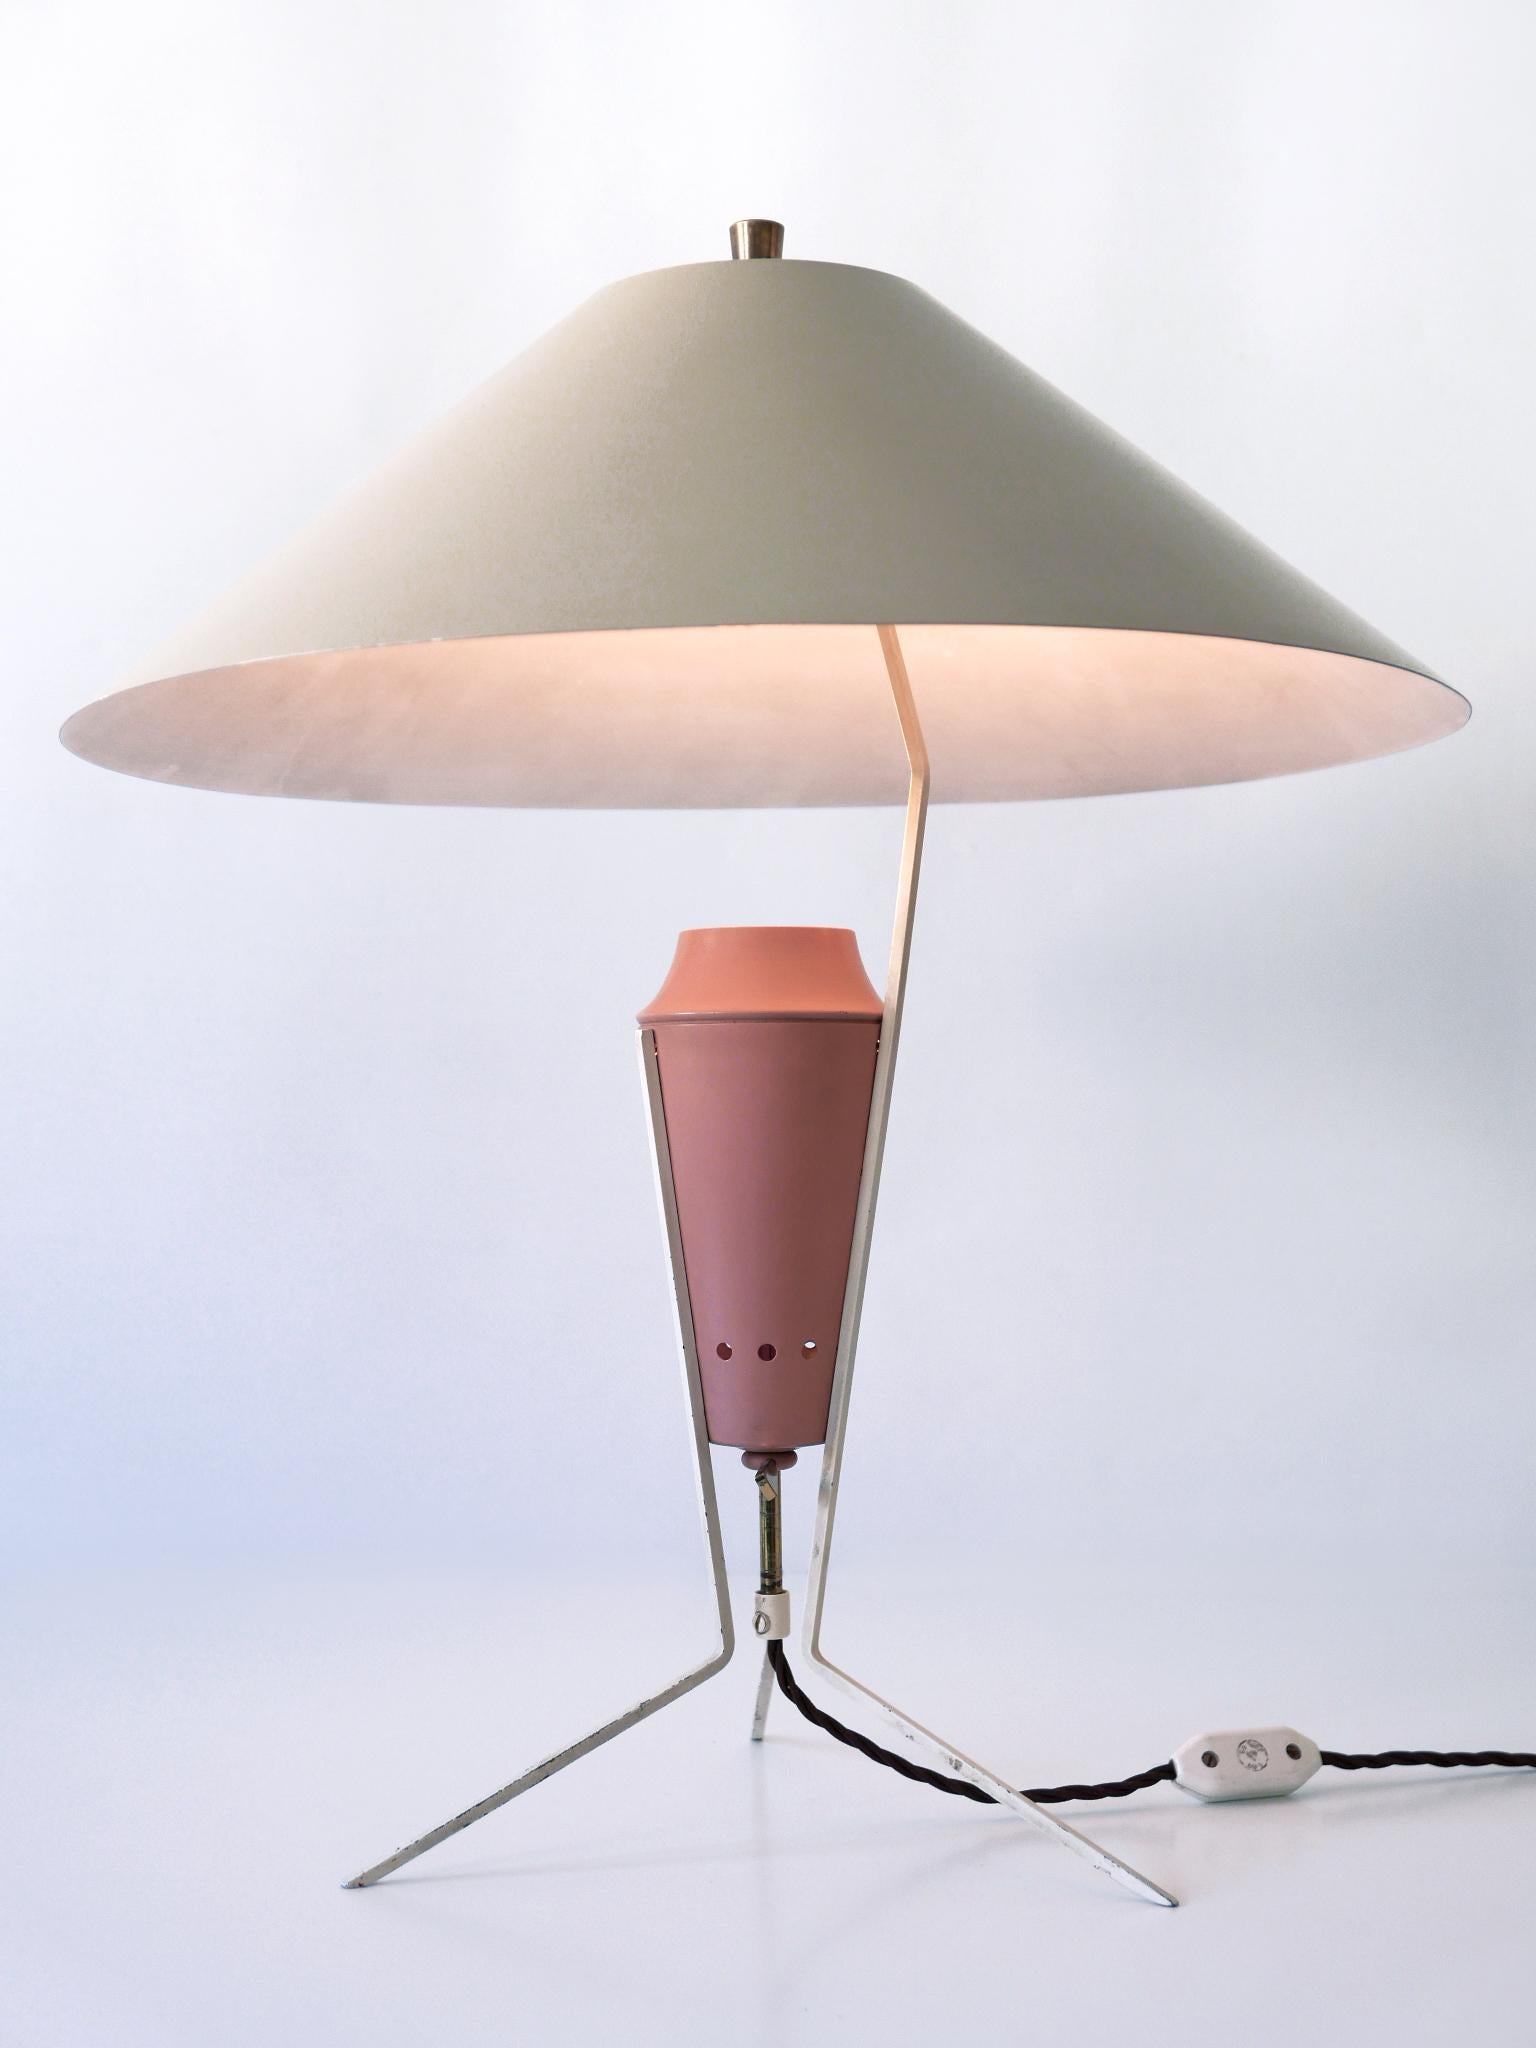 Exceptional Large & Elegant Mid Century Modern Table Lamp Germany 1950s For Sale 7